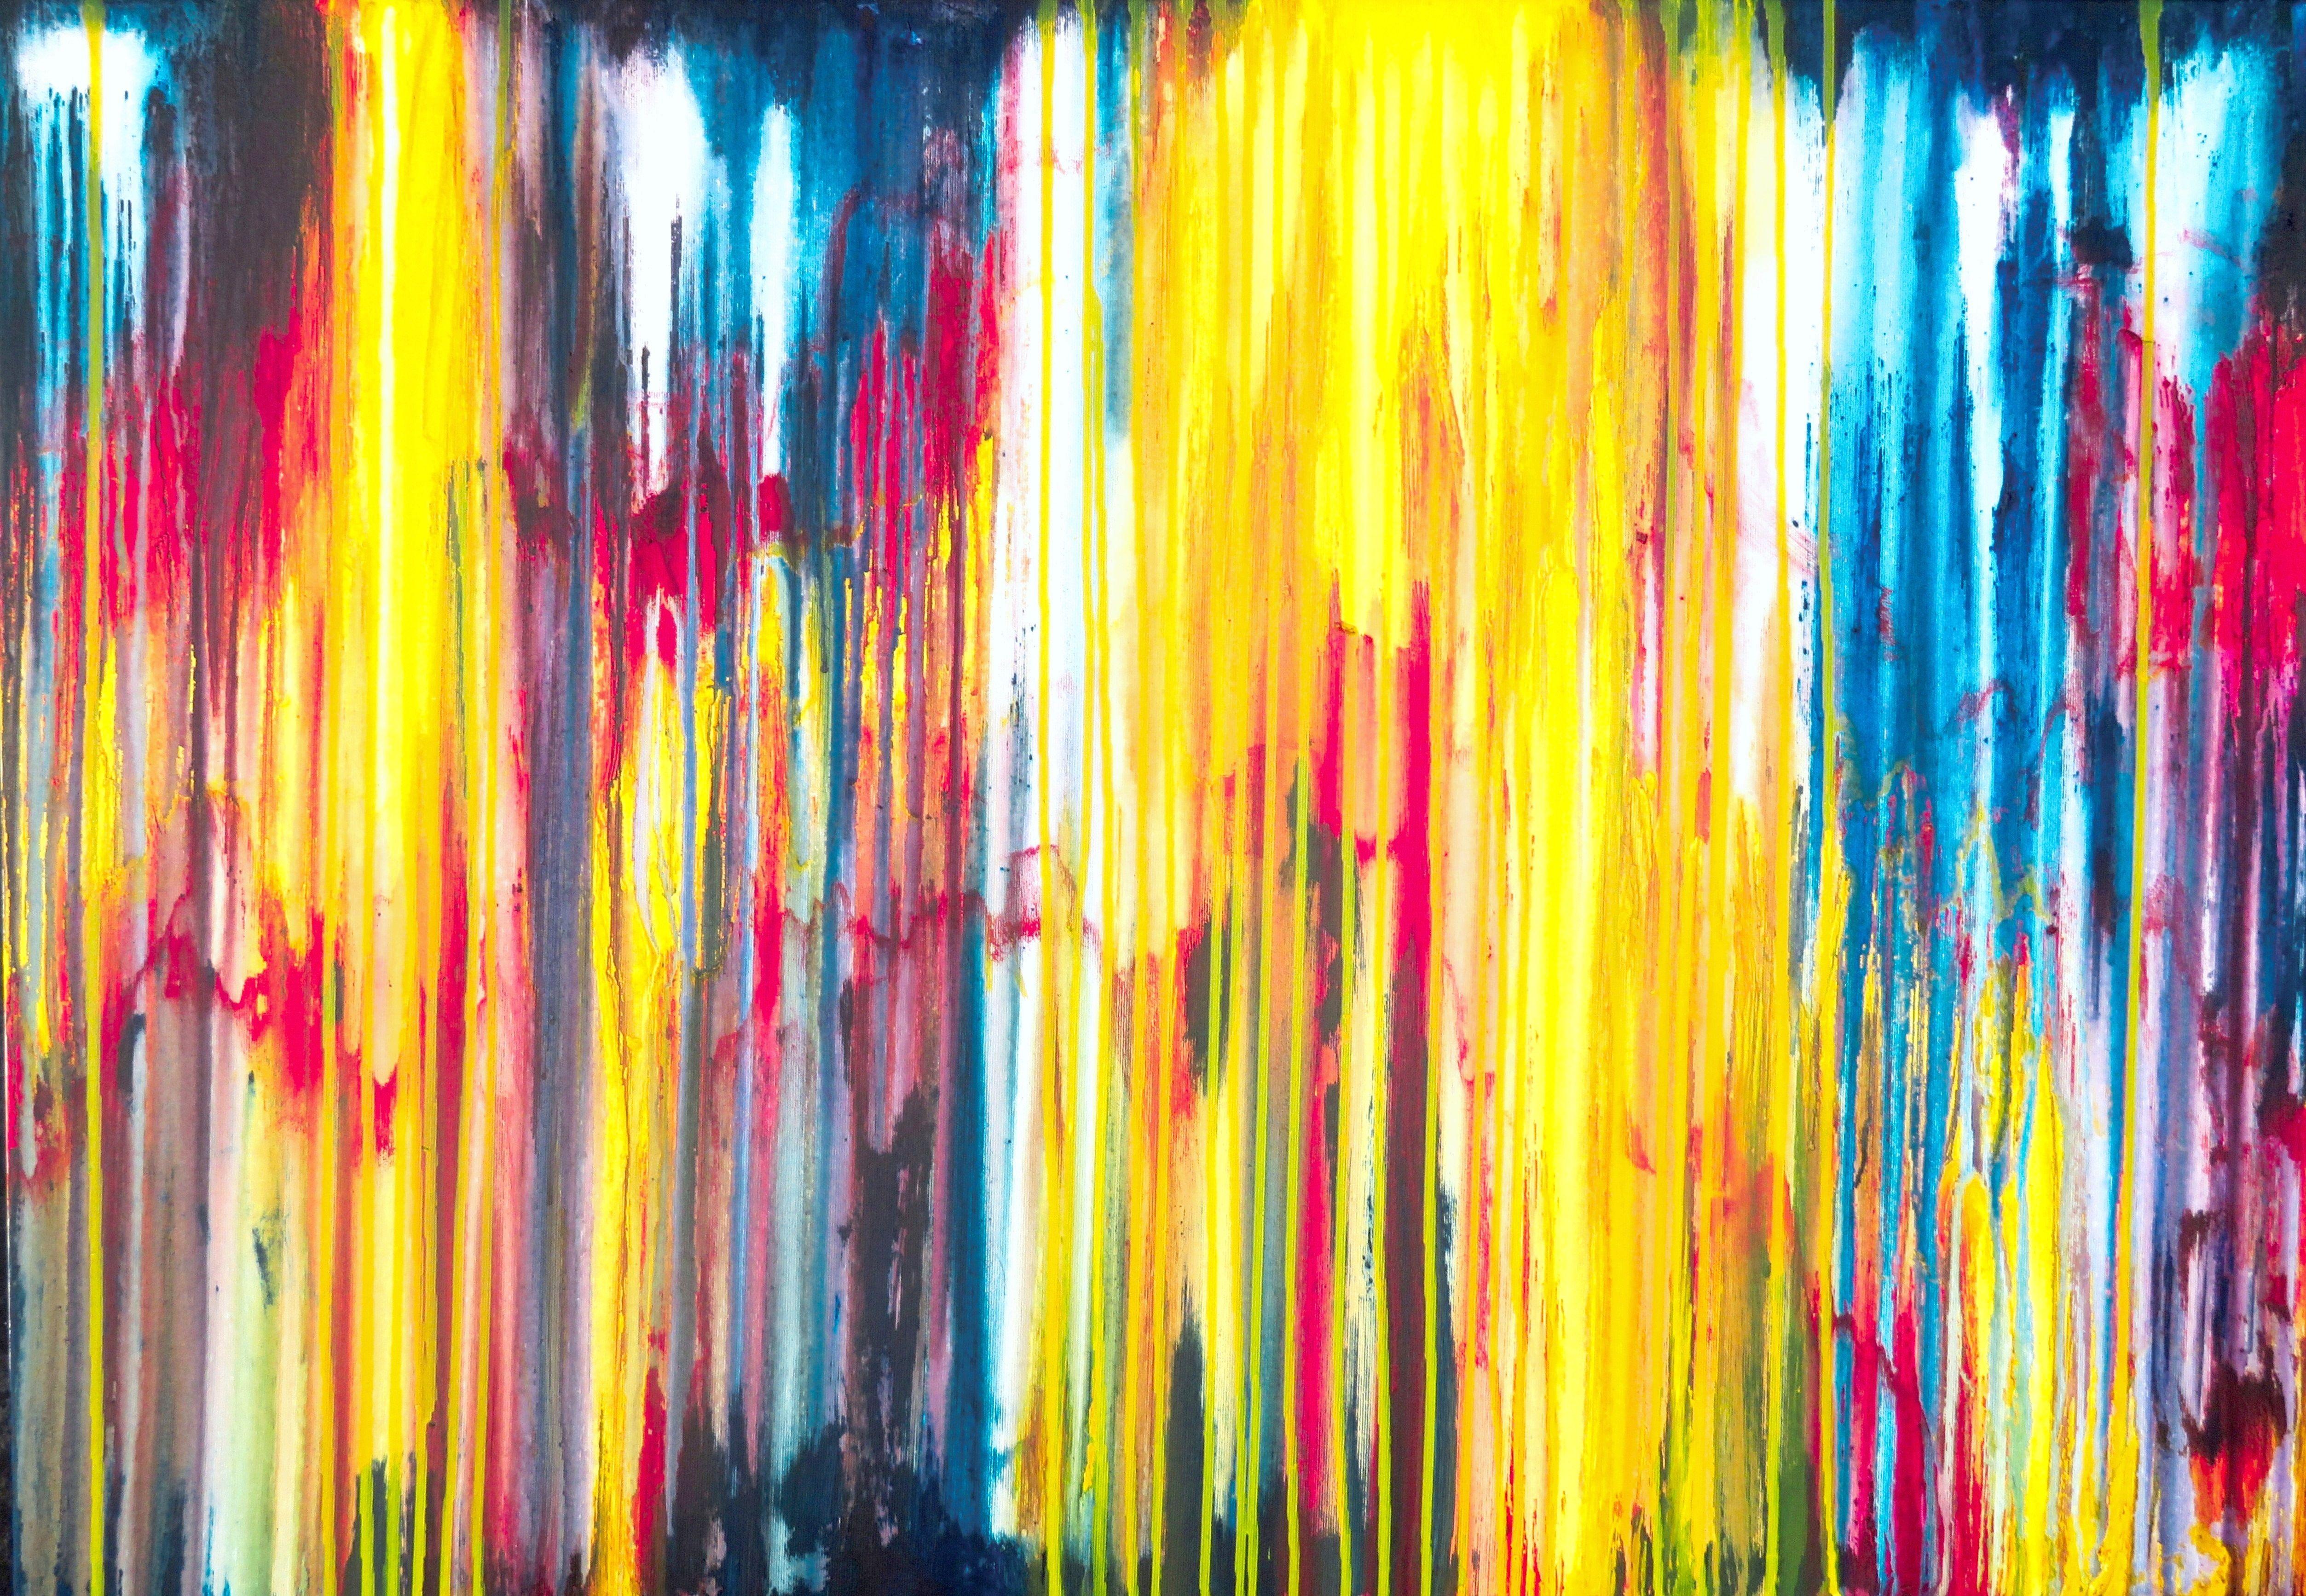 Carla Sá Fernandes Abstract Painting - The Emotional Creation #253, Painting, Acrylic on Canvas